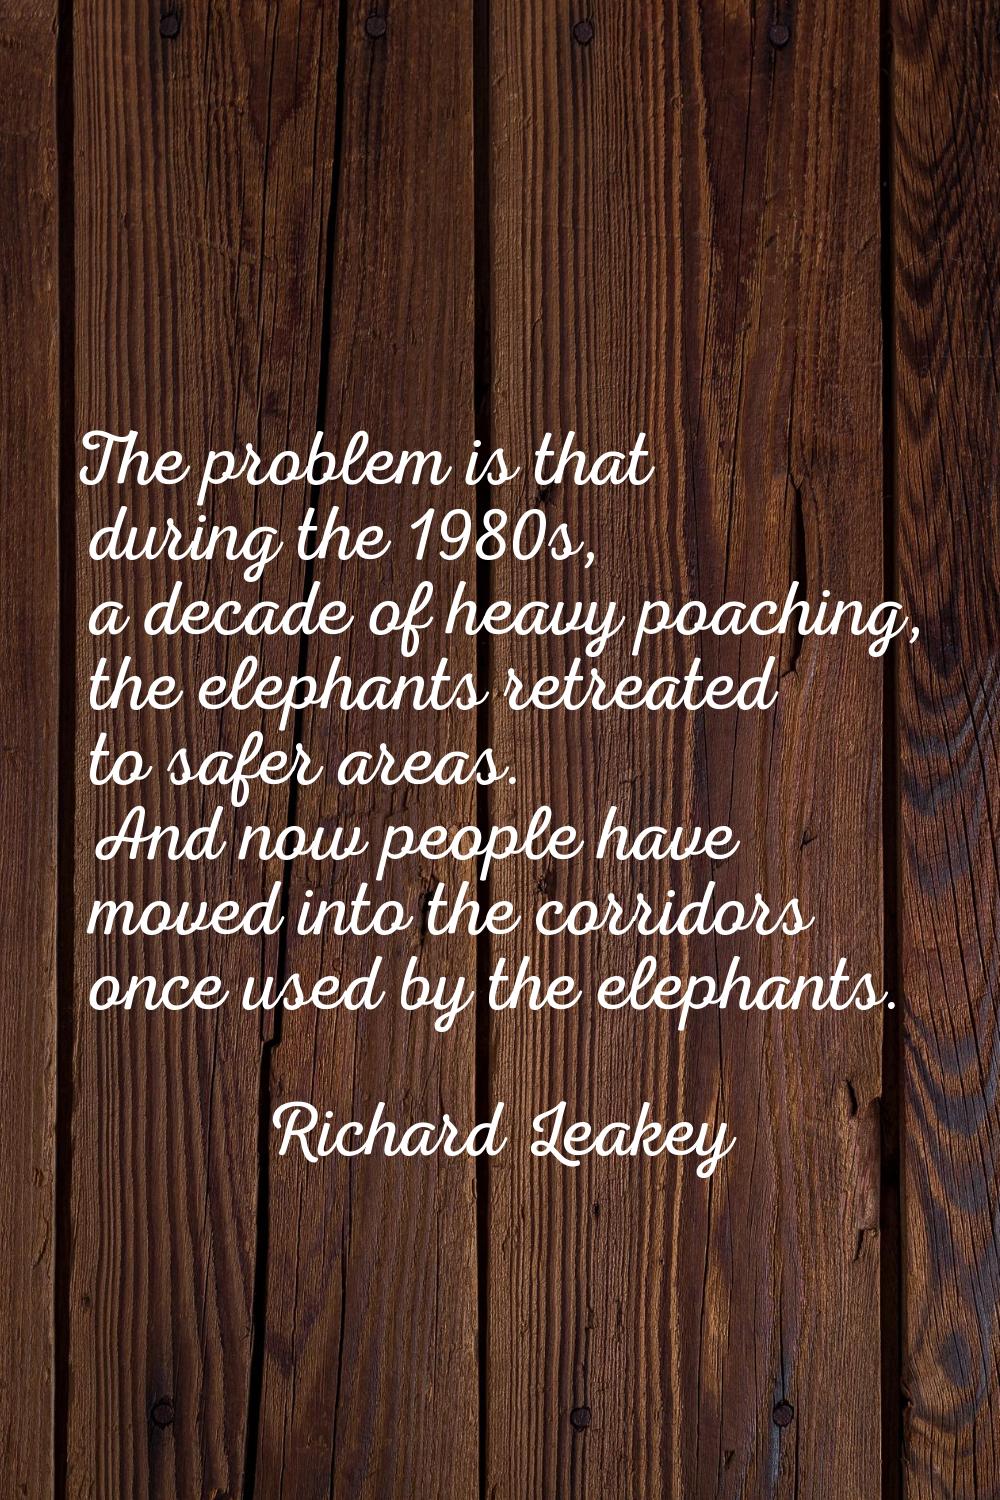 The problem is that during the 1980s, a decade of heavy poaching, the elephants retreated to safer 